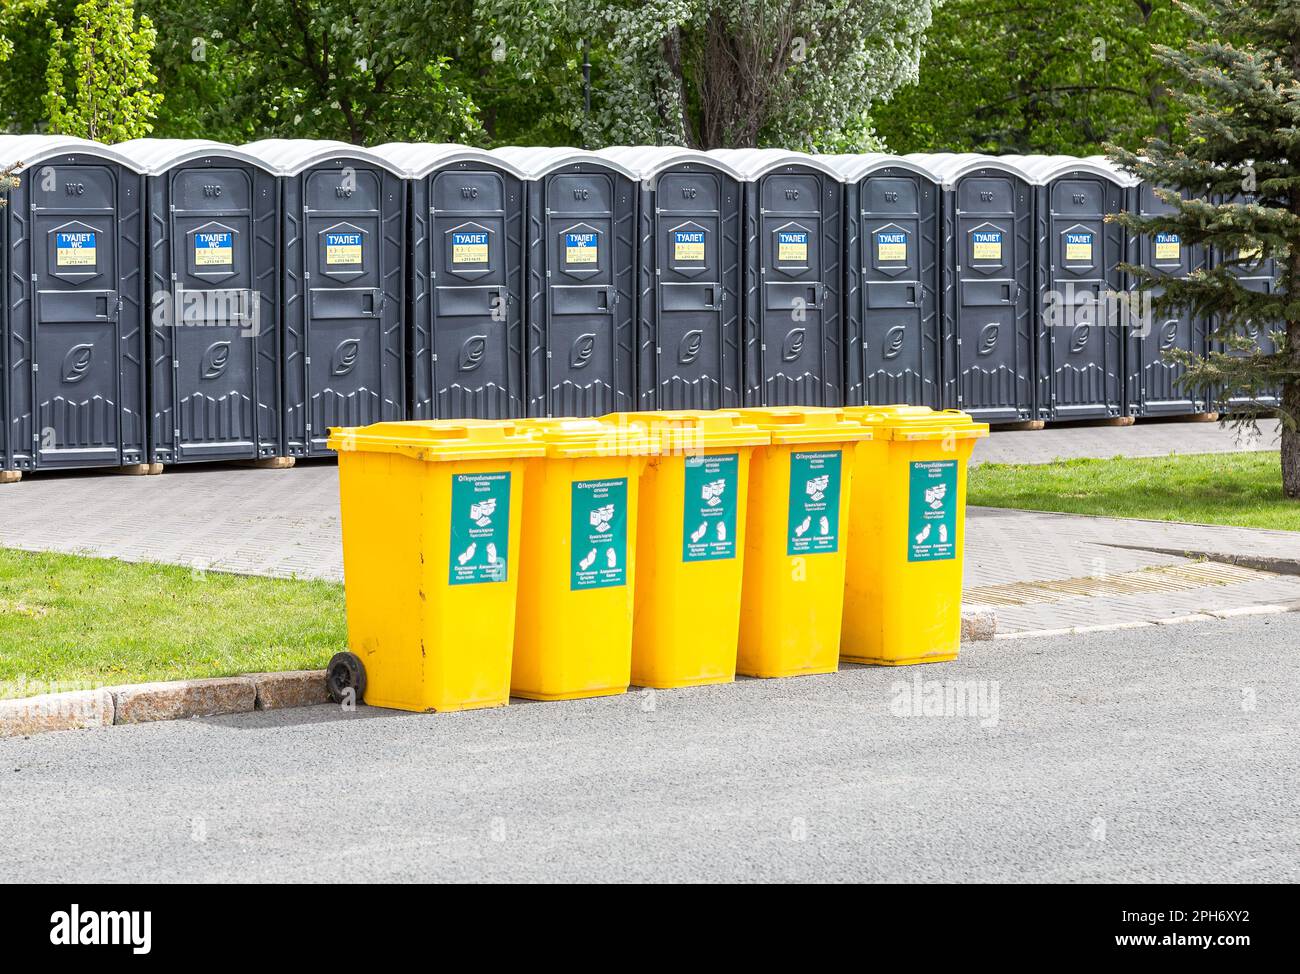 Samara, Russia - May 21, 2022: Portable public toilets and plastic trash containers at the city street in summer Stock Photo